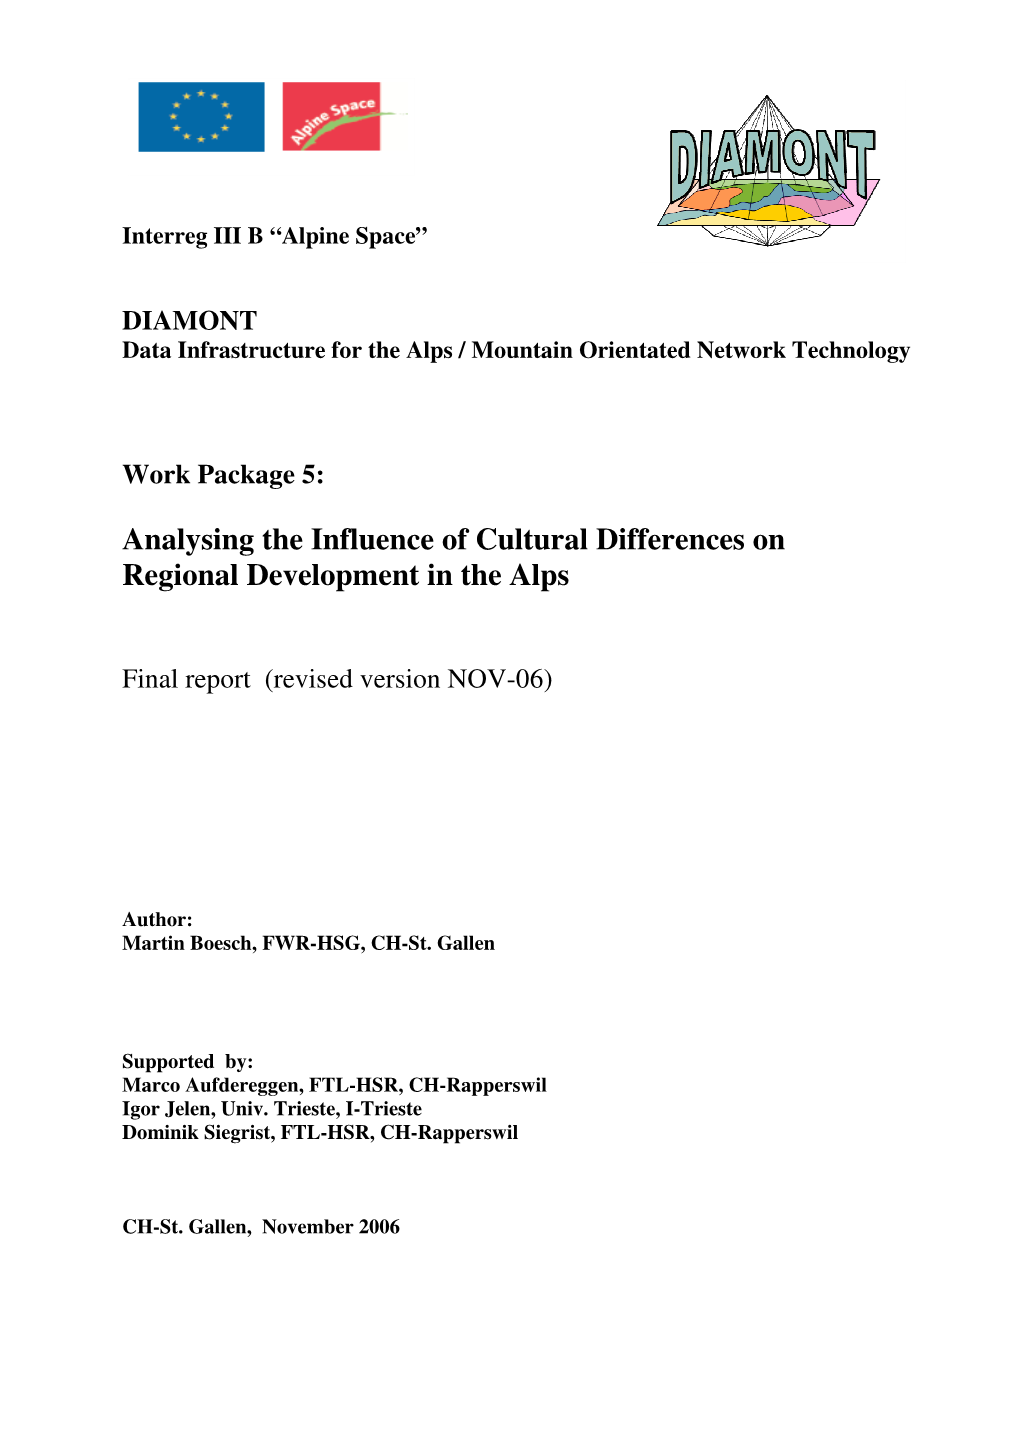 Analysing the Influence of Cultural Differences on Regional Development in the Alps